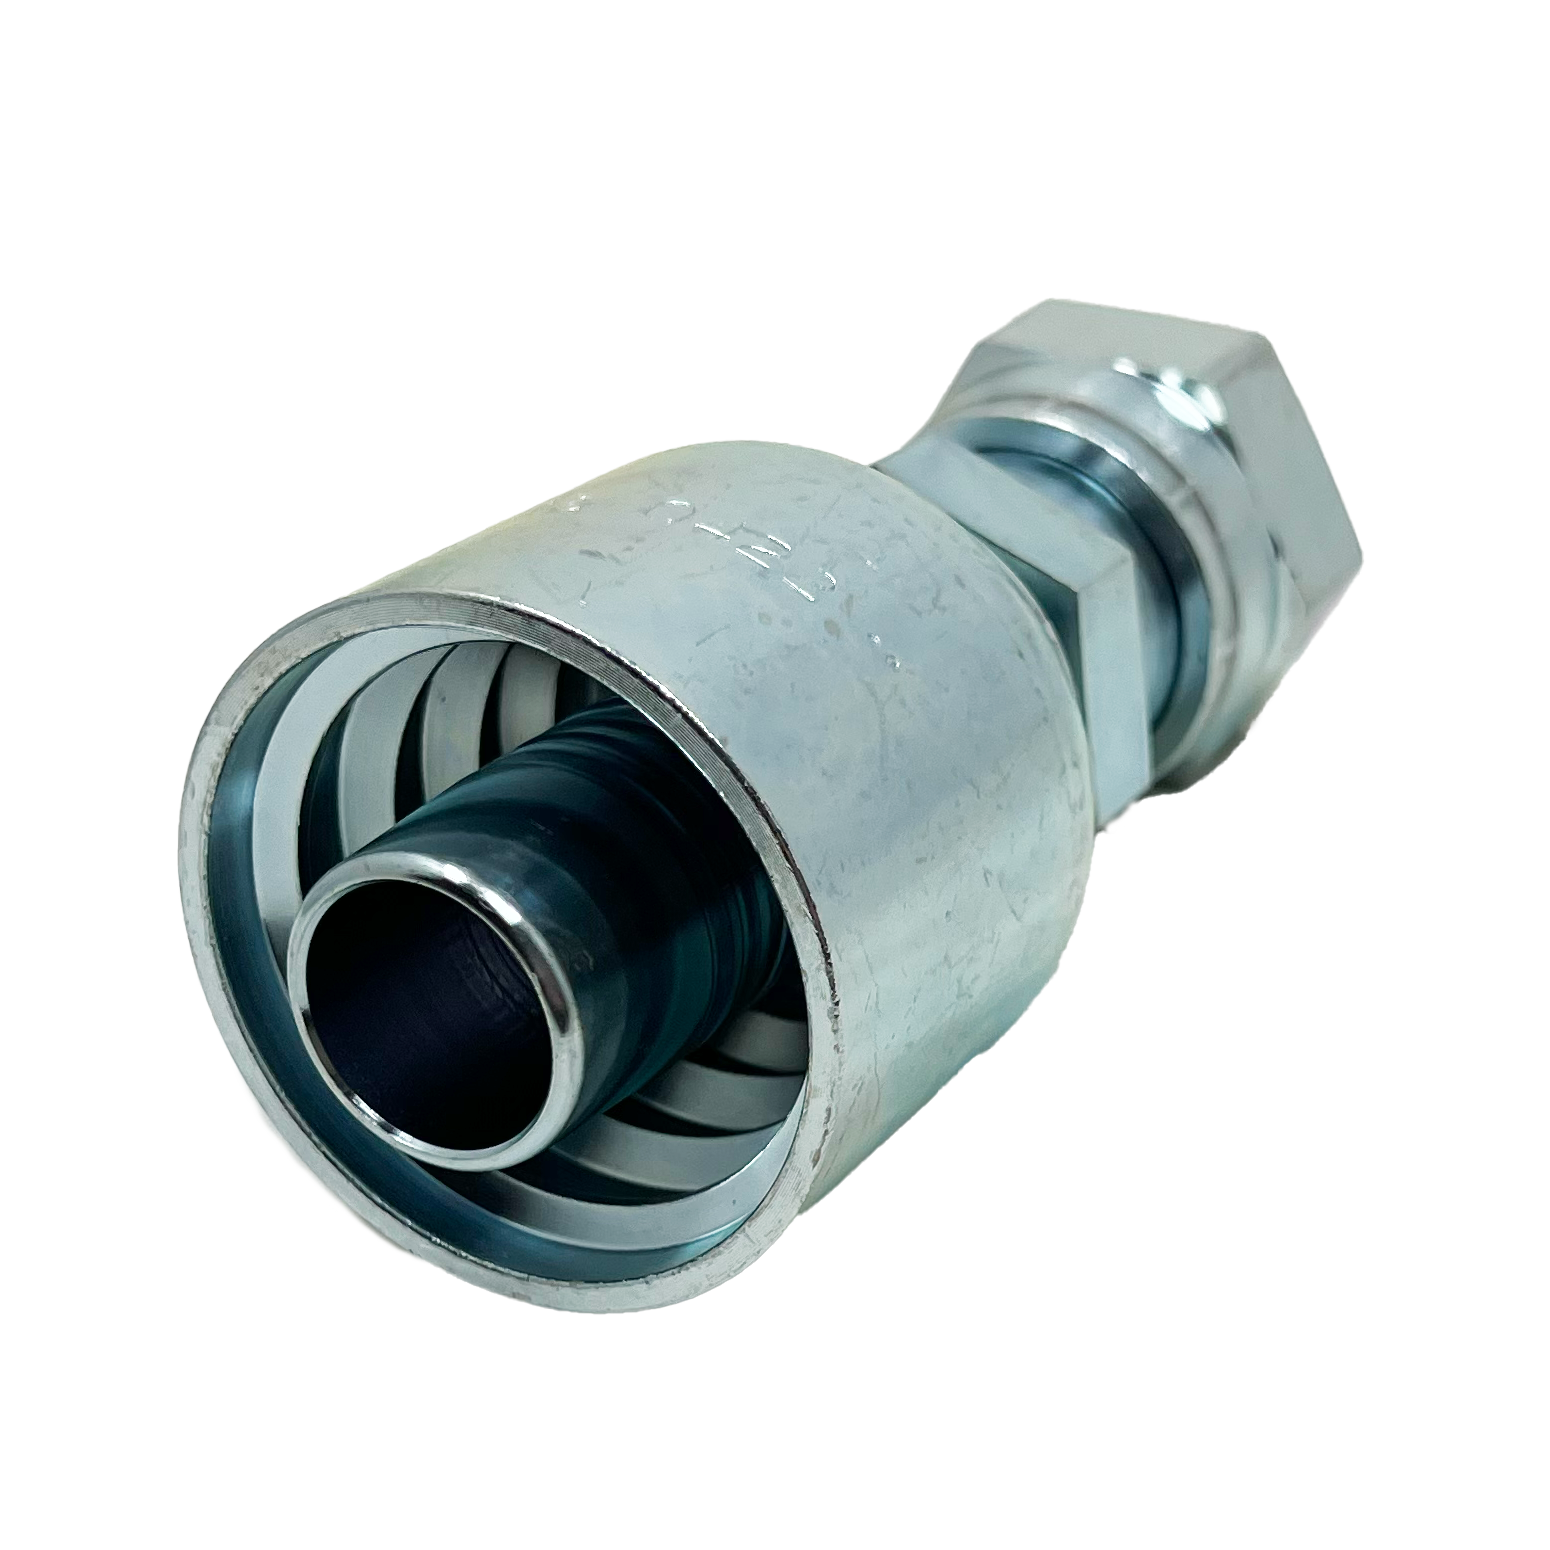 B2-OFFX-1620: Continental Hose Fitting, 1" Hose ID x 1-11/16-12 Female ORFS, Straight Swivel Connection